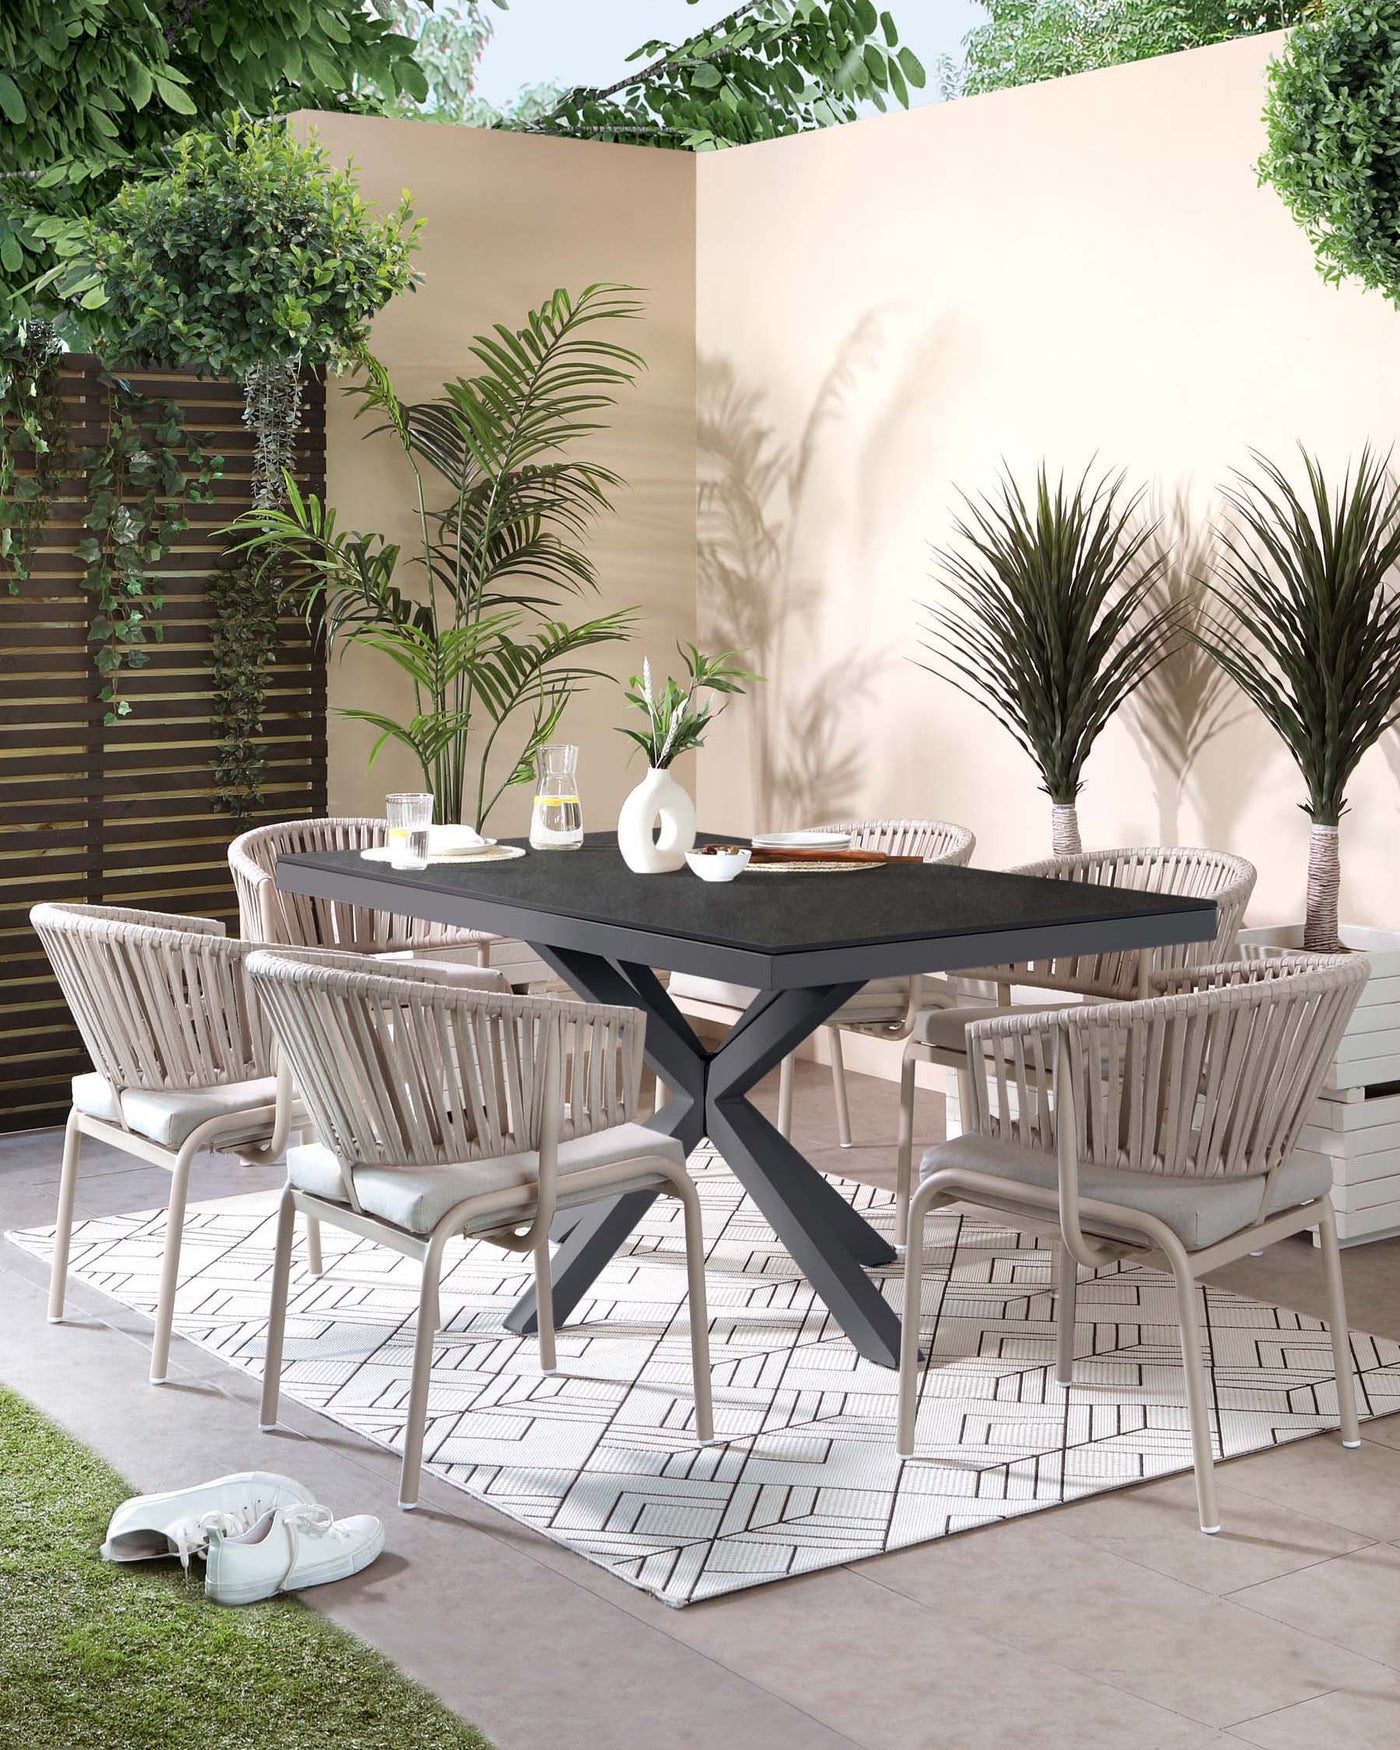 Outdoor dining set including a large, dark grey rectangle table with a unique X-shaped leg design, surrounded by six modern white armchairs with a vertical slat back design and light grey cushioned seats on an ornate white and grey geometric patterned area rug.